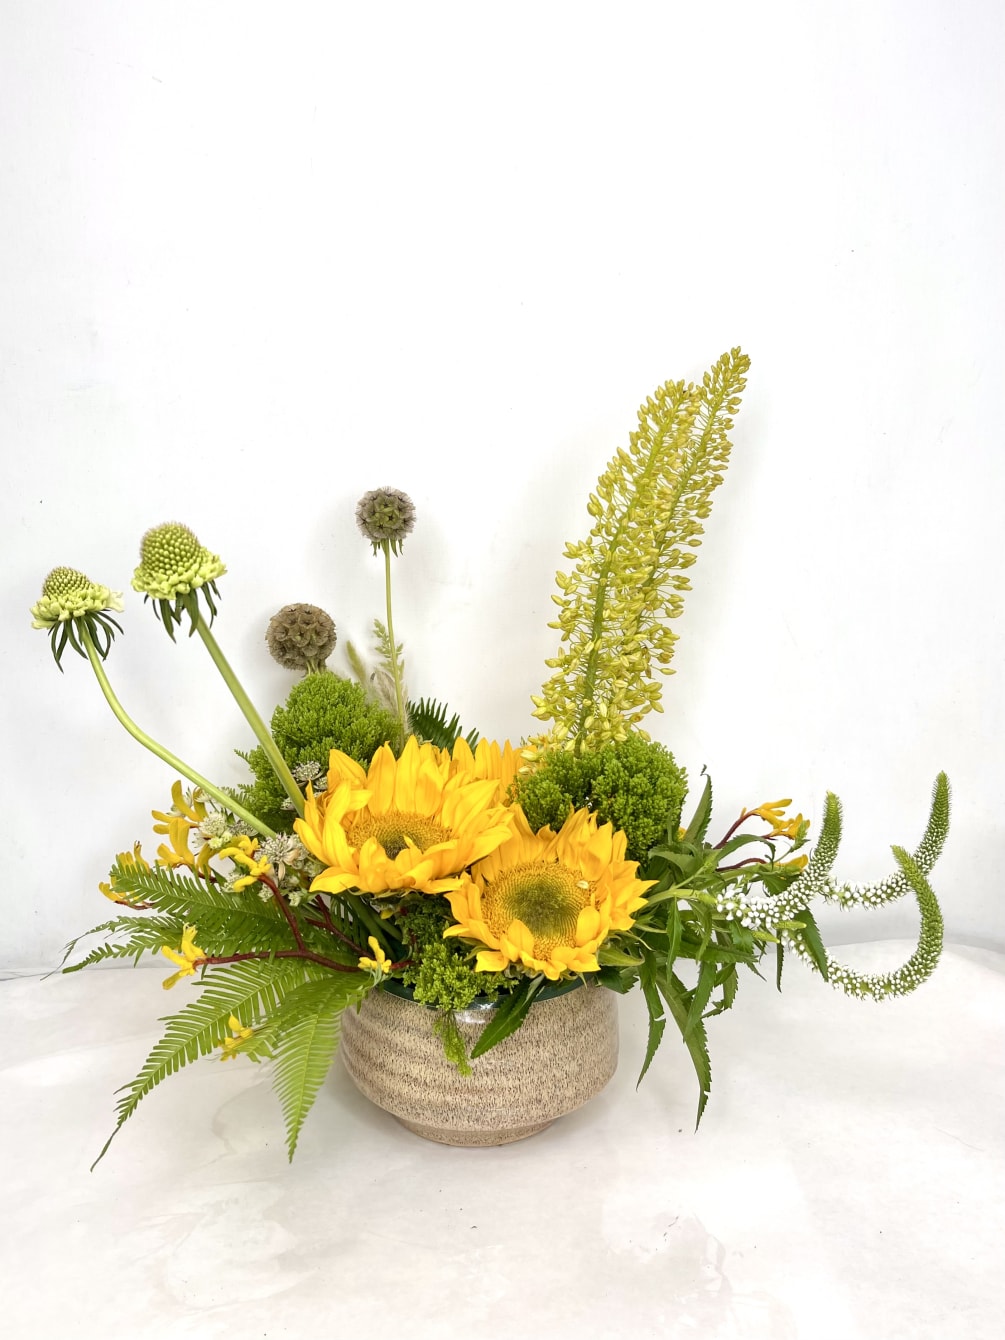 Named after the Goldfinch songbird with its beautiful yellow colors, this arrangement